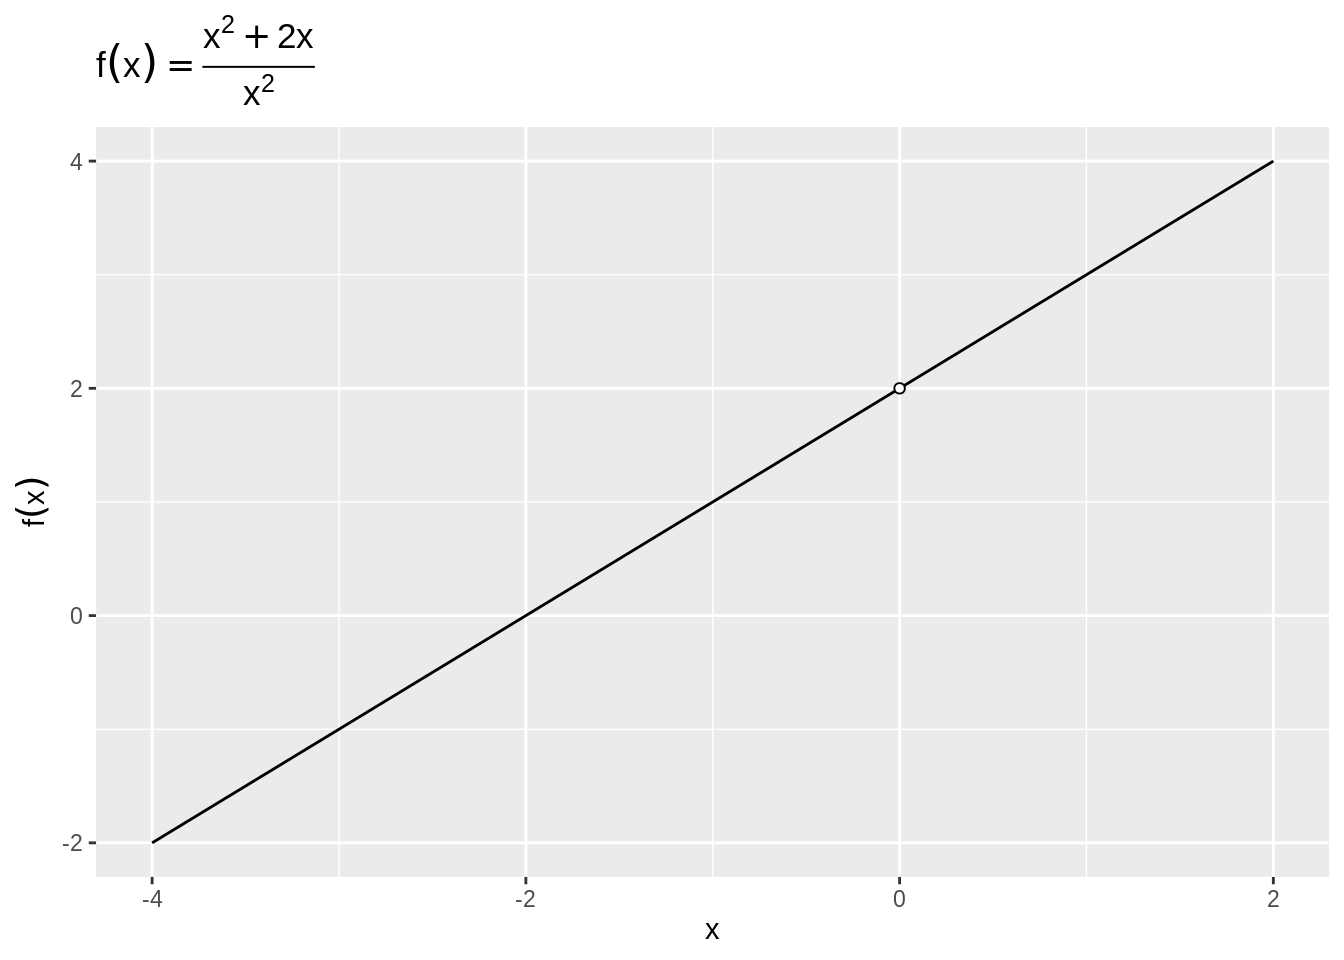 A function undedefined at x = 0